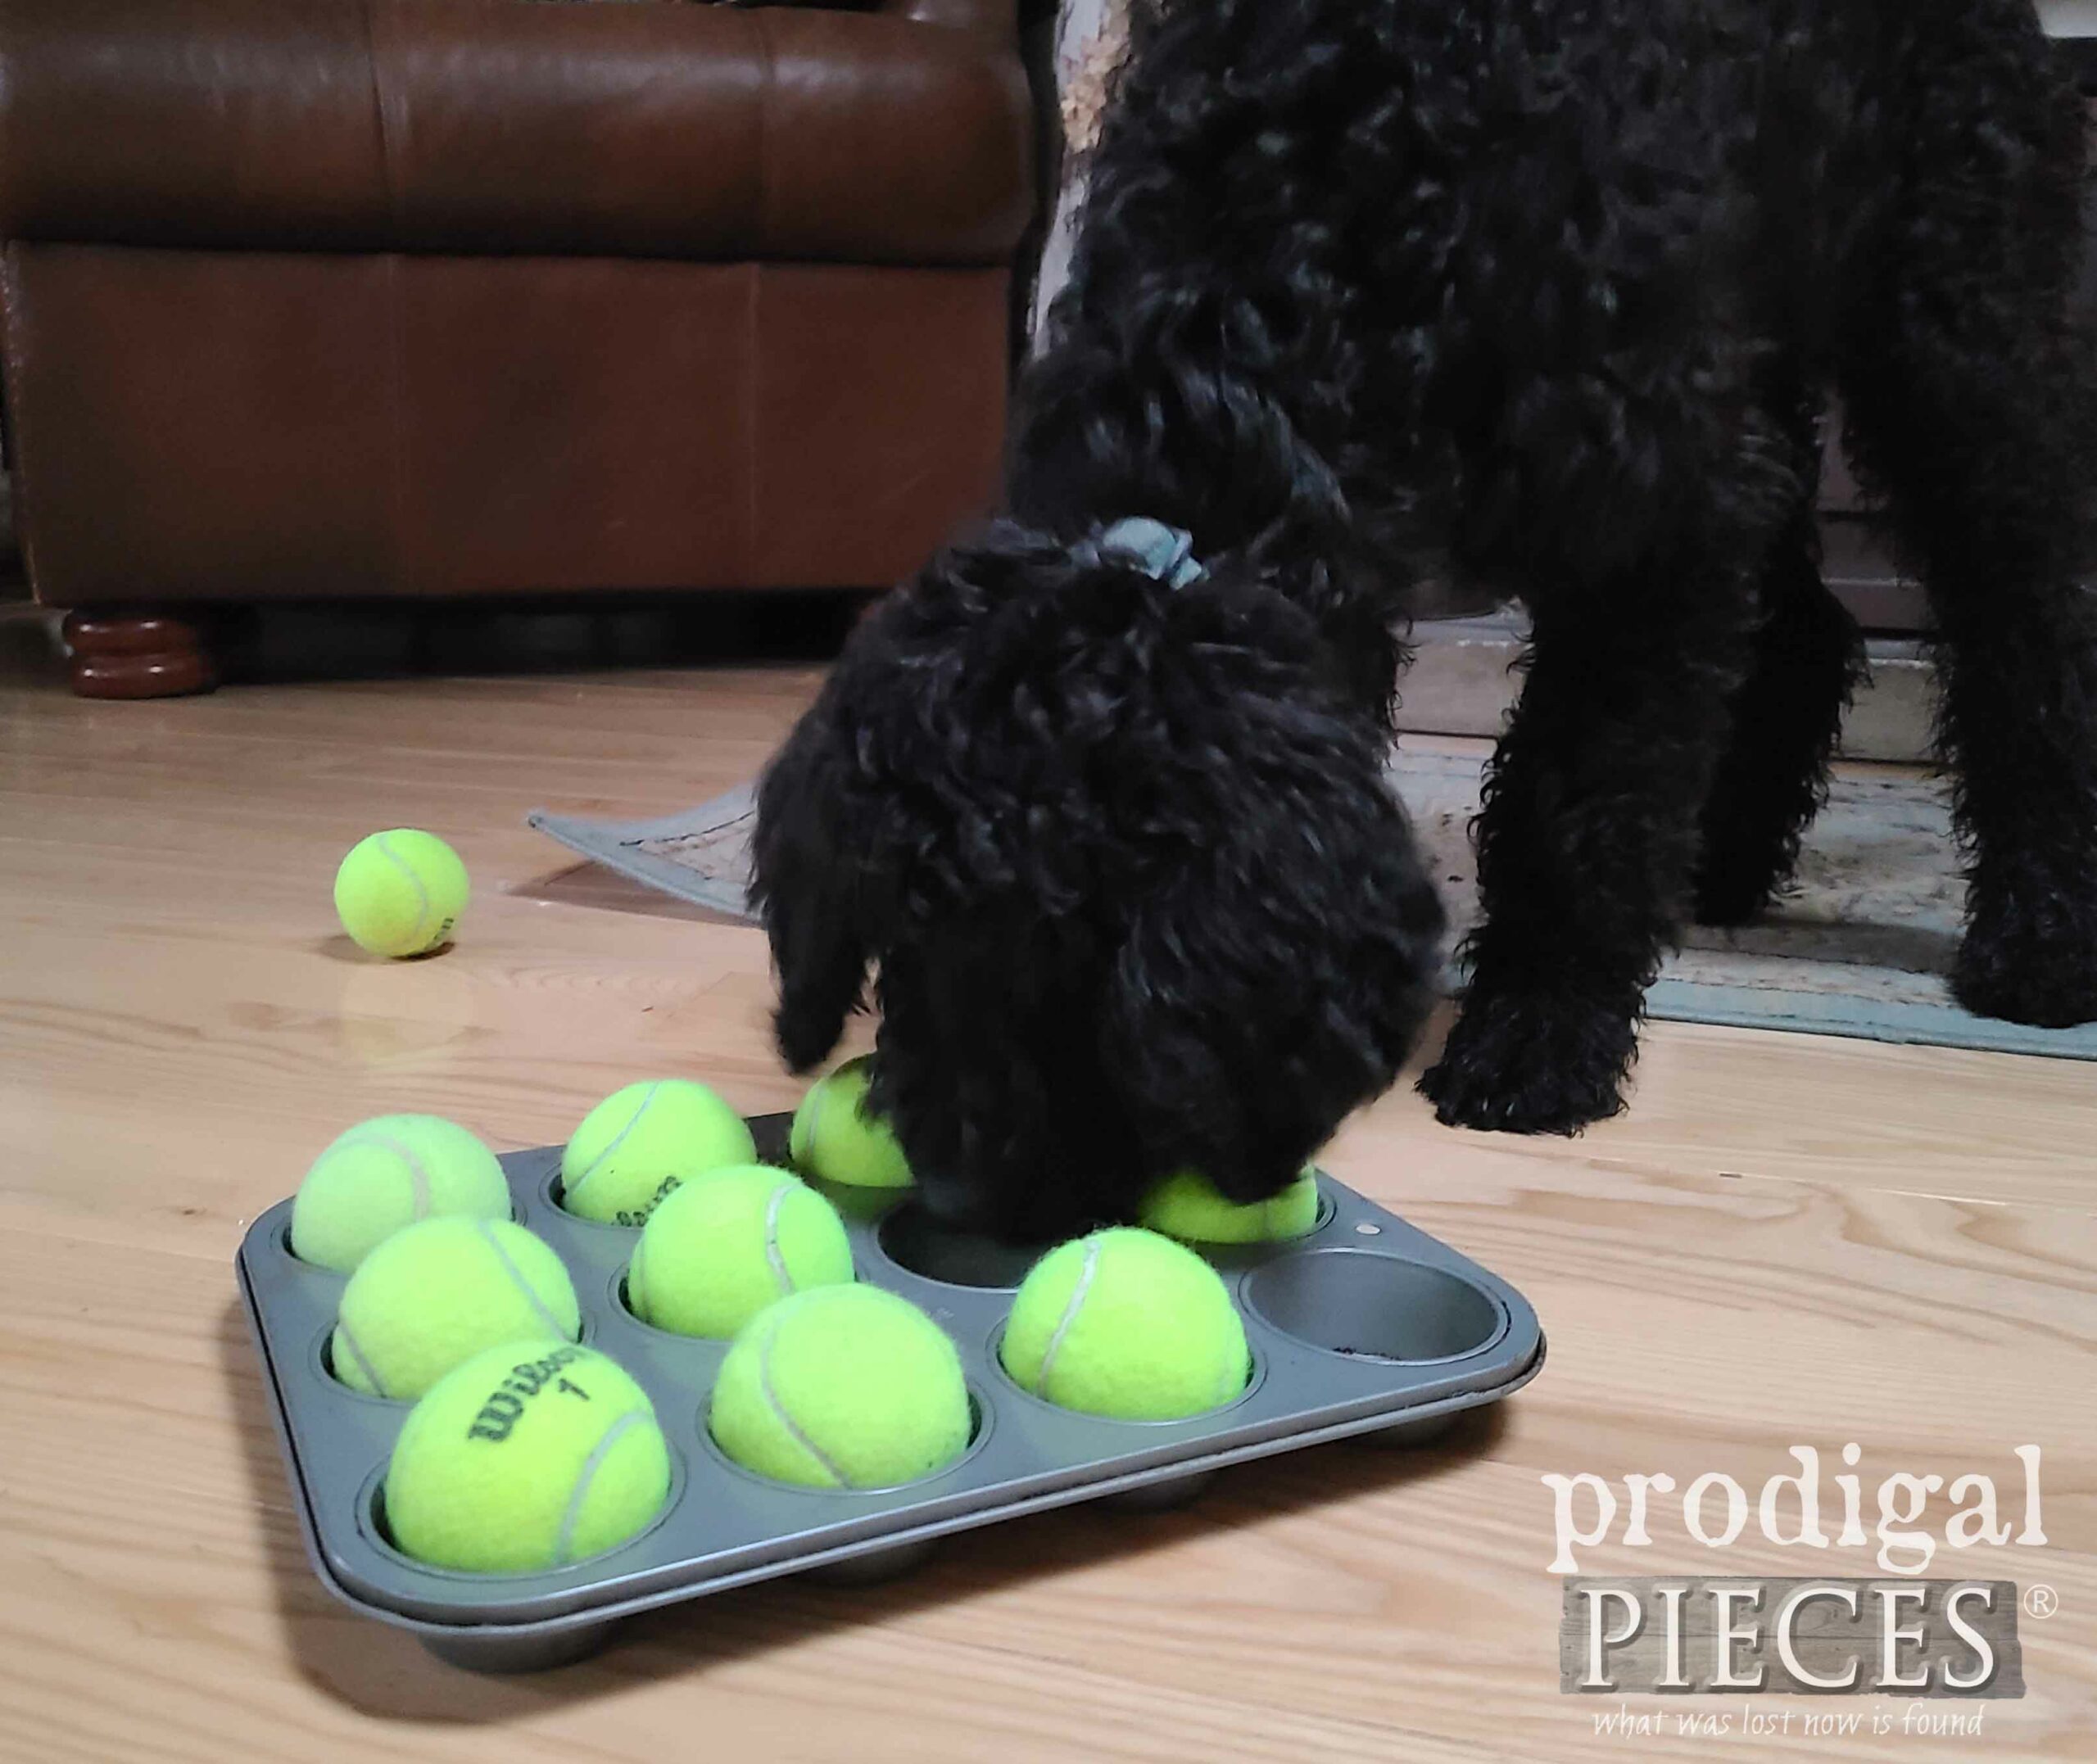 Goldendoodle Puppy Finding Treats in DIY Dog Toy | prodigalpieces.com #prodigalpieces #dog #puppy